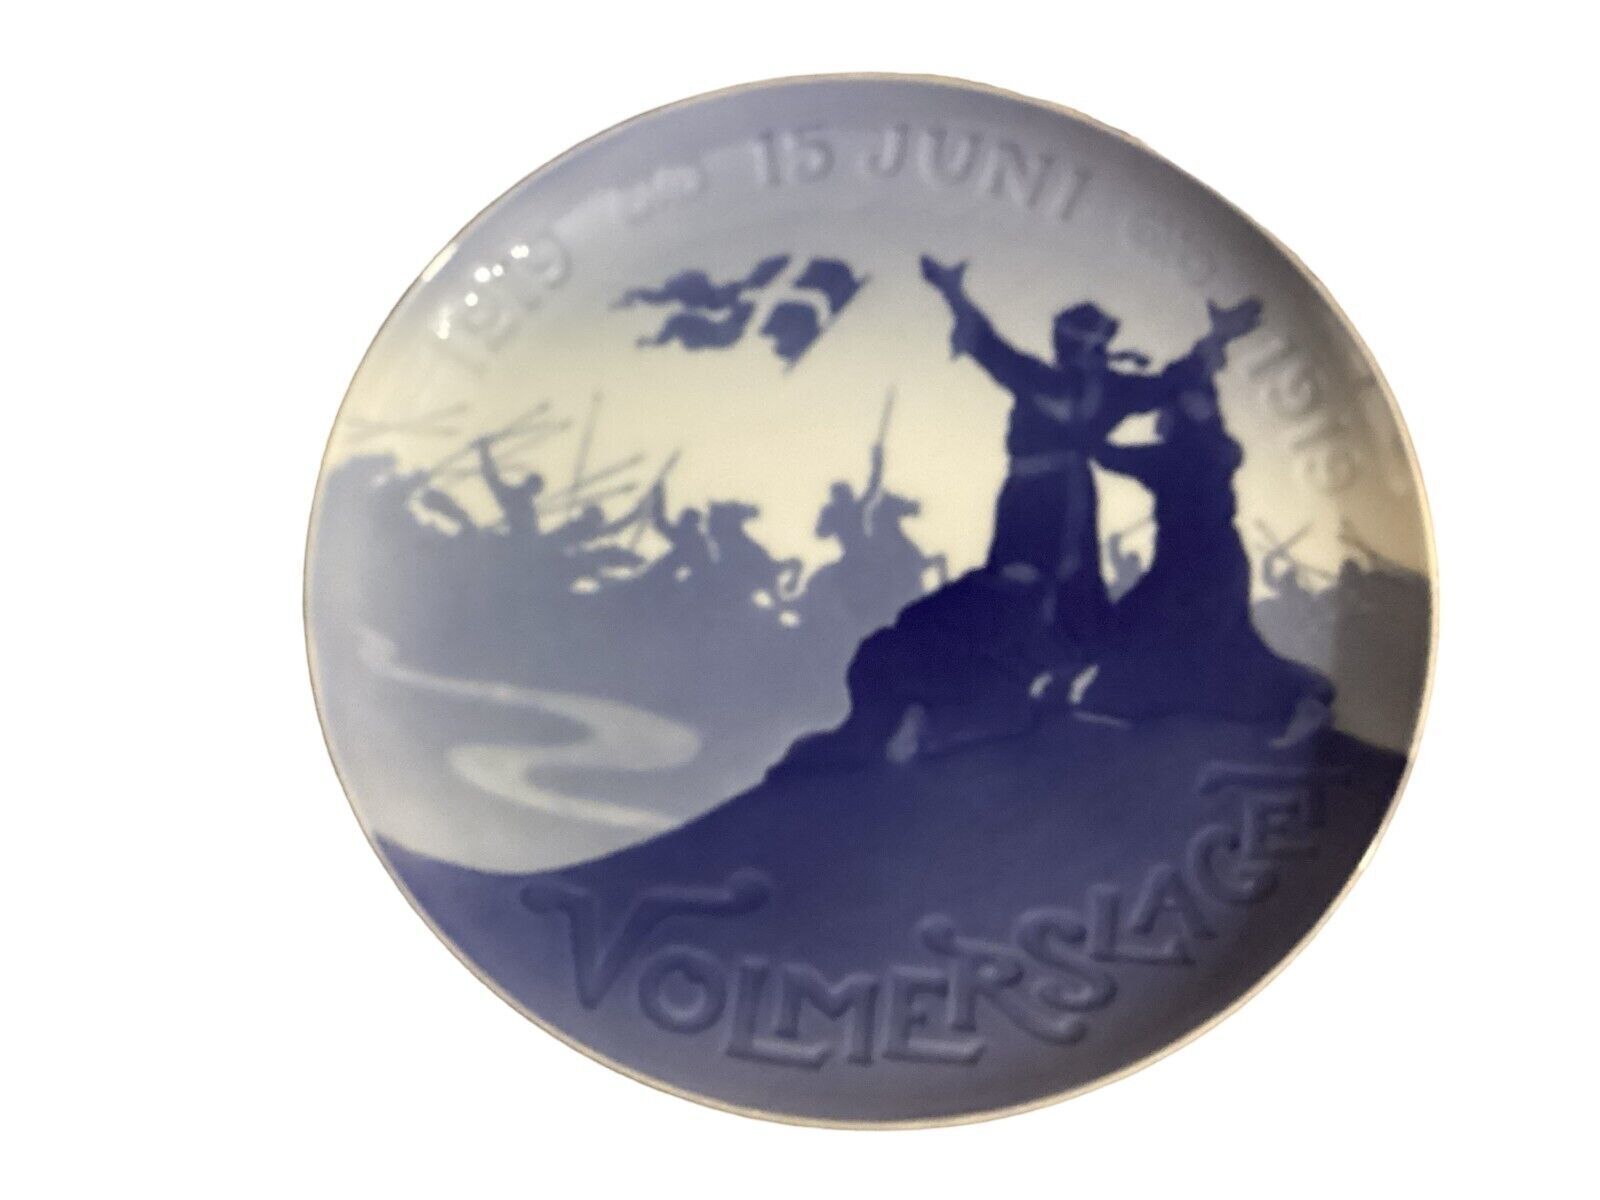 Bing & Grondahl Volmerslaget Wall Hanging Collectible Display Plate - $98.01